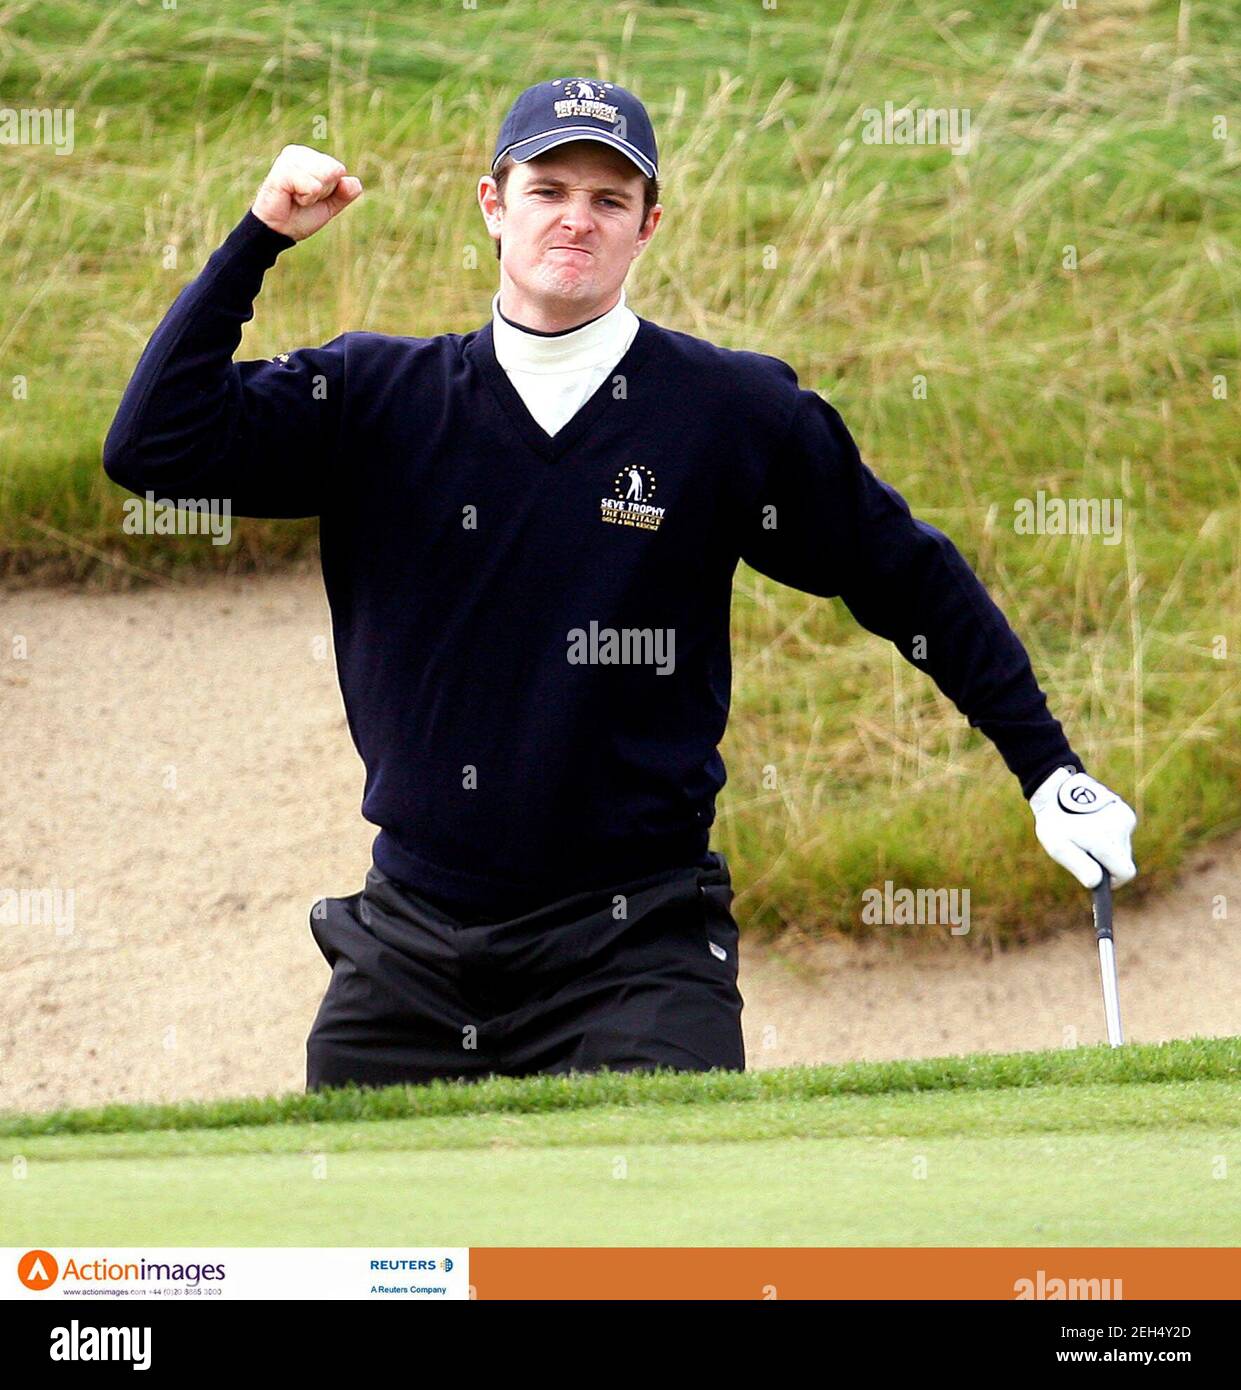 Golf - Seve Trophy - The Heritage Golf & Country Club, Killenard, Co.  Laois, Ireland - 28/9/07 Great Britain and Ireland's Justin Rose celebrates  after he holes his bunker shot on the